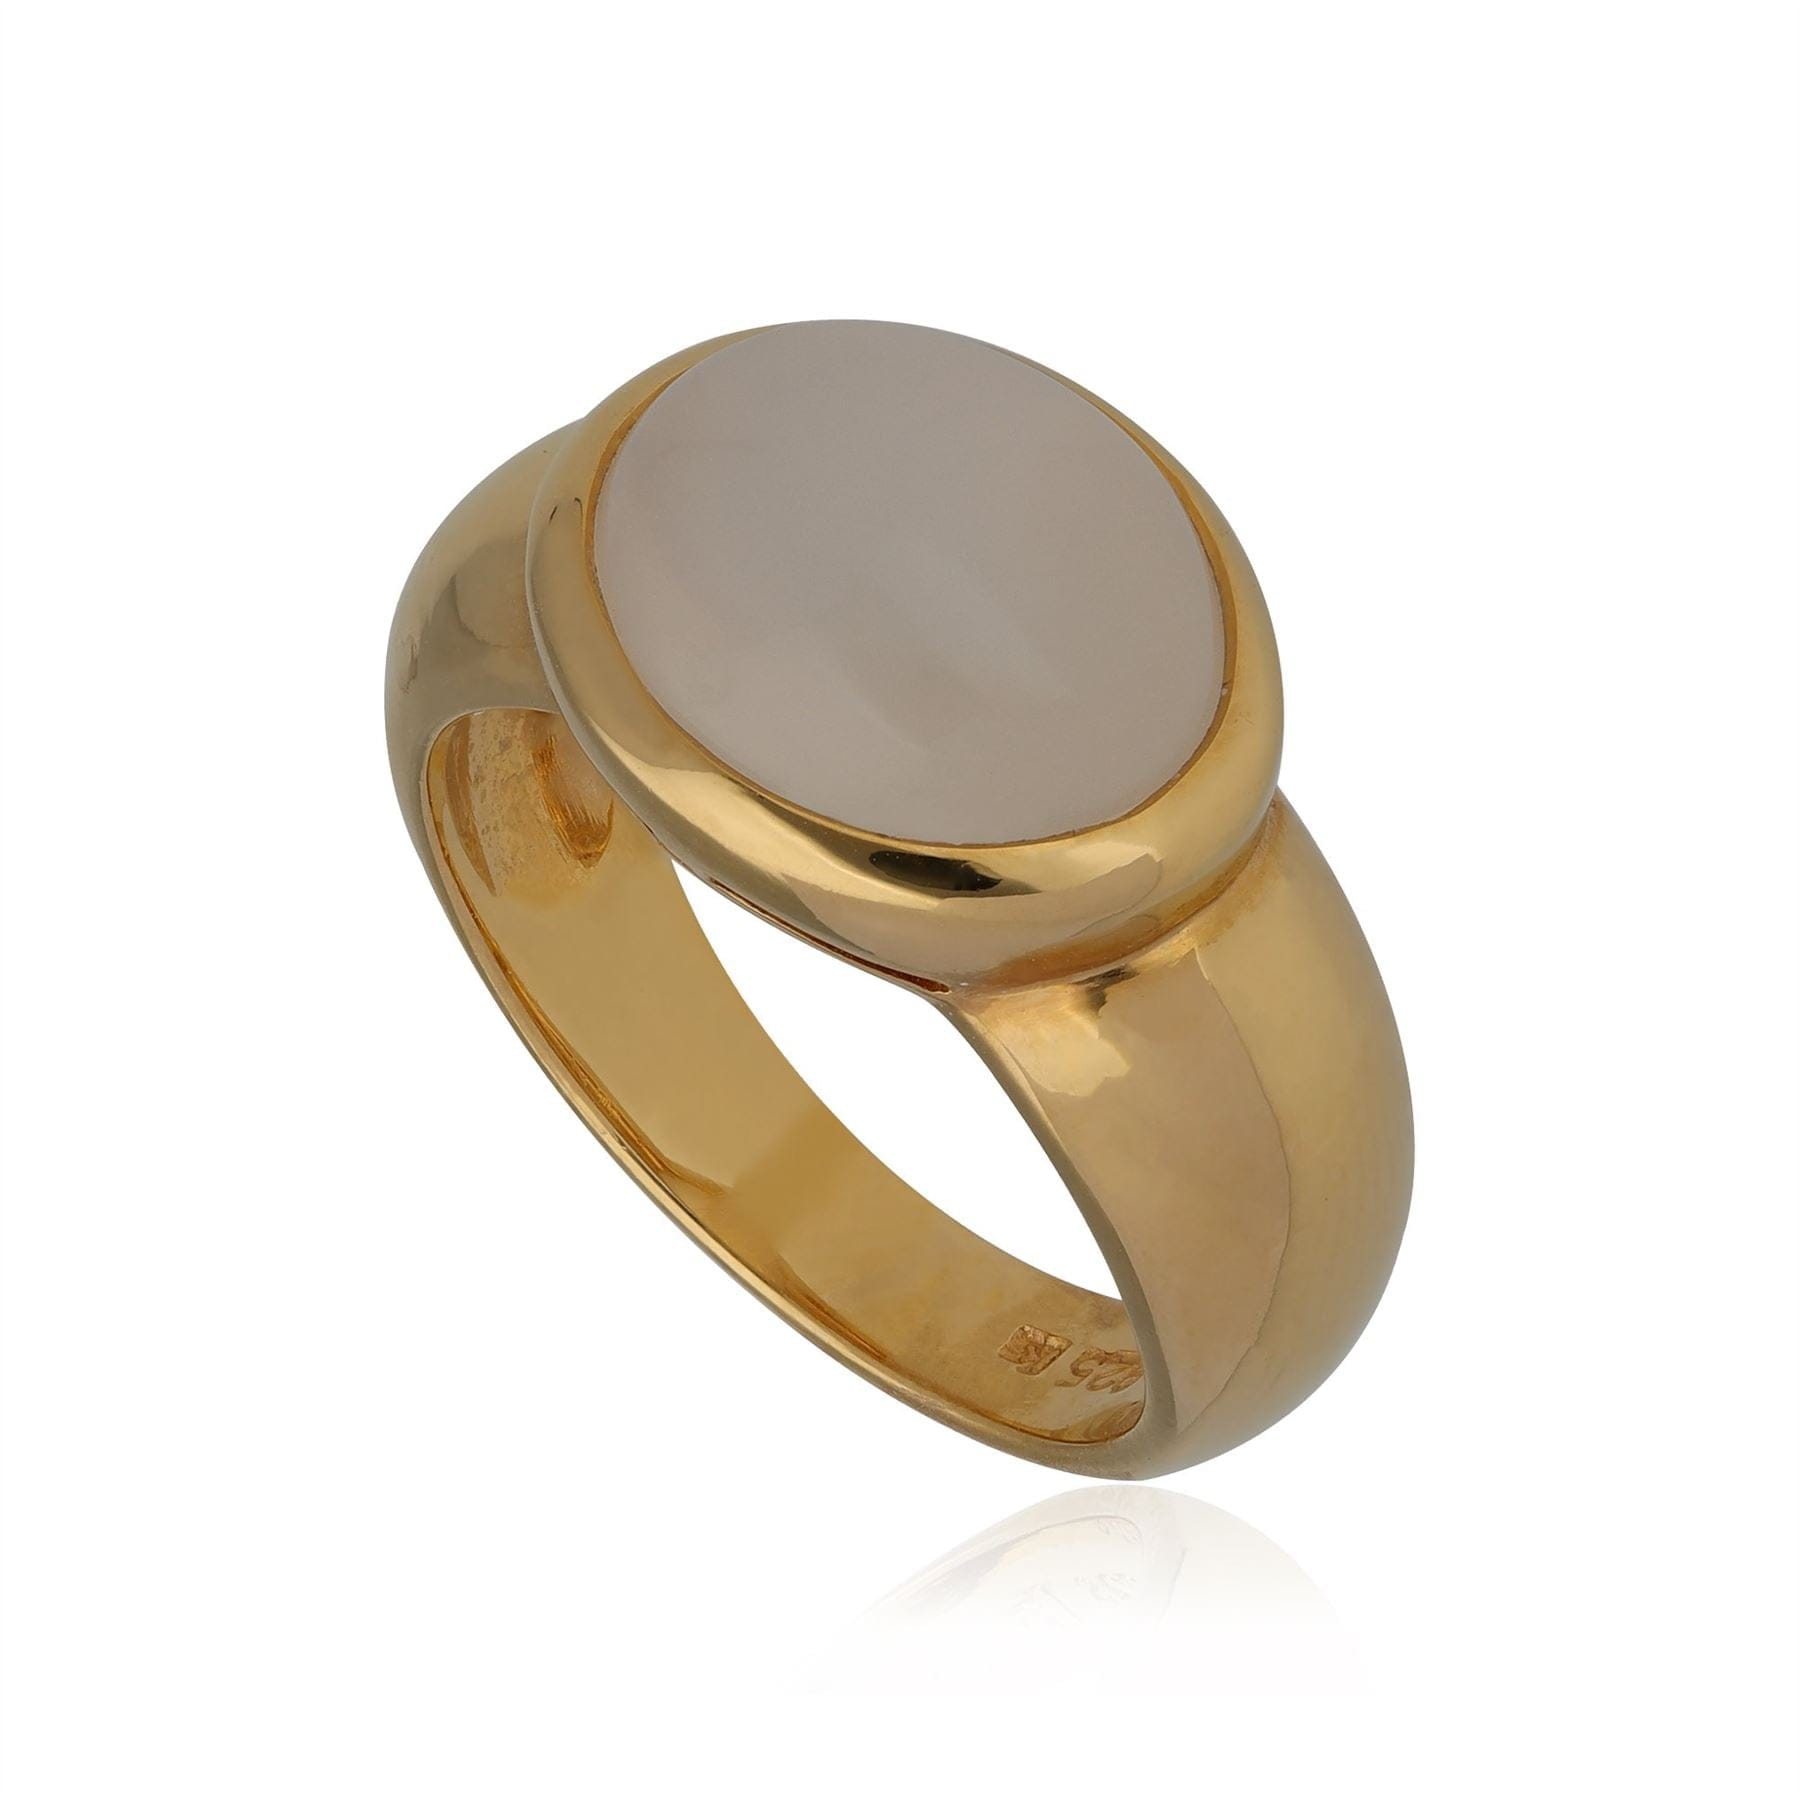 Kosmos Moonstone Cocktail Ring in Gold Plated Sterling Silver - Gemondo